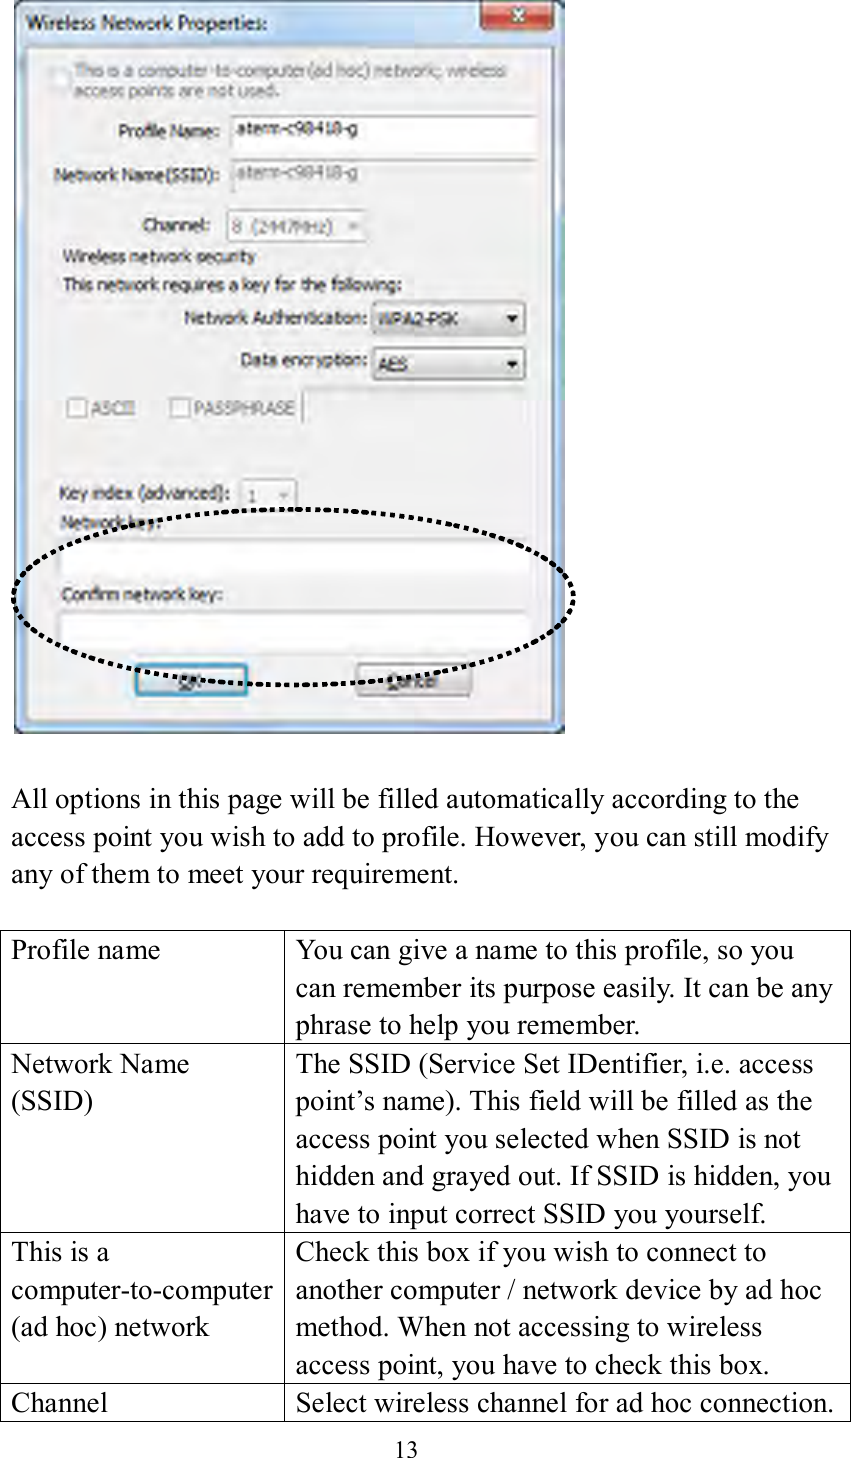 13    All options in this page will be filled automatically according to the access point you wish to add to profile. However, you can still modify any of them to meet your requirement.  Profile name You can give a name to this profile, so you can remember its purpose easily. It can be any phrase to help you remember. Network Name (SSID) The SSID (Service Set IDentifier, i.e. access point’s name). This field will be filled as the access point you selected when SSID is not hidden and grayed out. If SSID is hidden, you have to input correct SSID you yourself. This is a computer-to-computer (ad hoc) network Check this box if you wish to connect to another computer / network device by ad hoc method. When not accessing to wireless access point, you have to check this box. Channel Select wireless channel for ad hoc connection. 